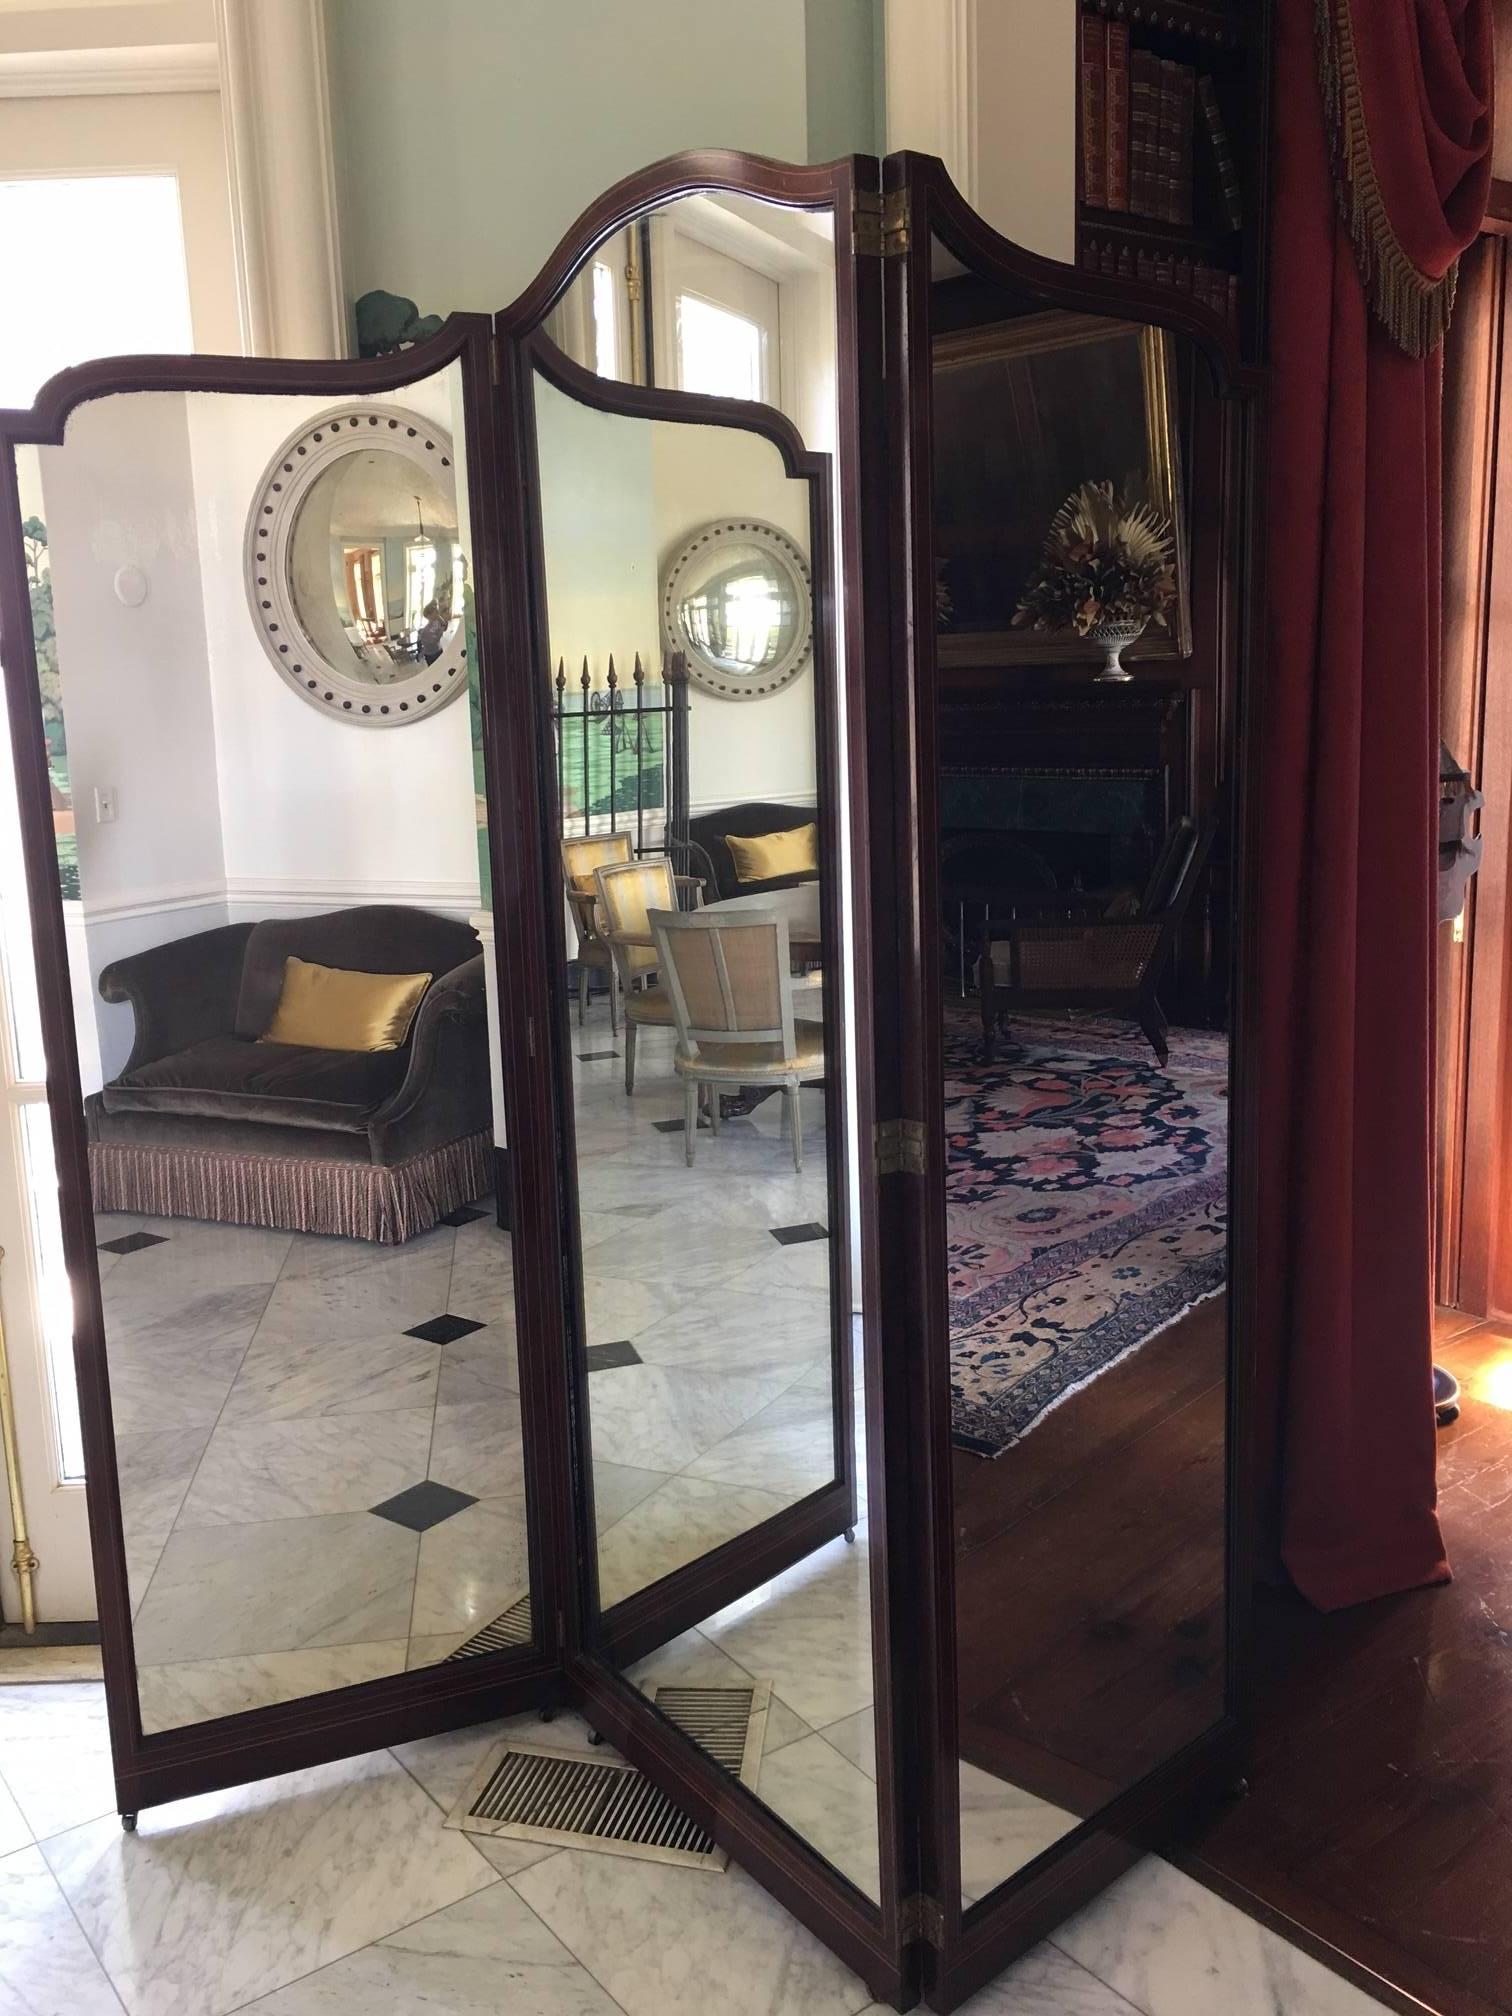 Three-panel folding mahogany screen with dual inlay. The back was upholstered in damask, now needing replacement. Brass casters and hinges.
Good antique condition.

Fabric on back needs replacement.

The two side panels are 24 1/2